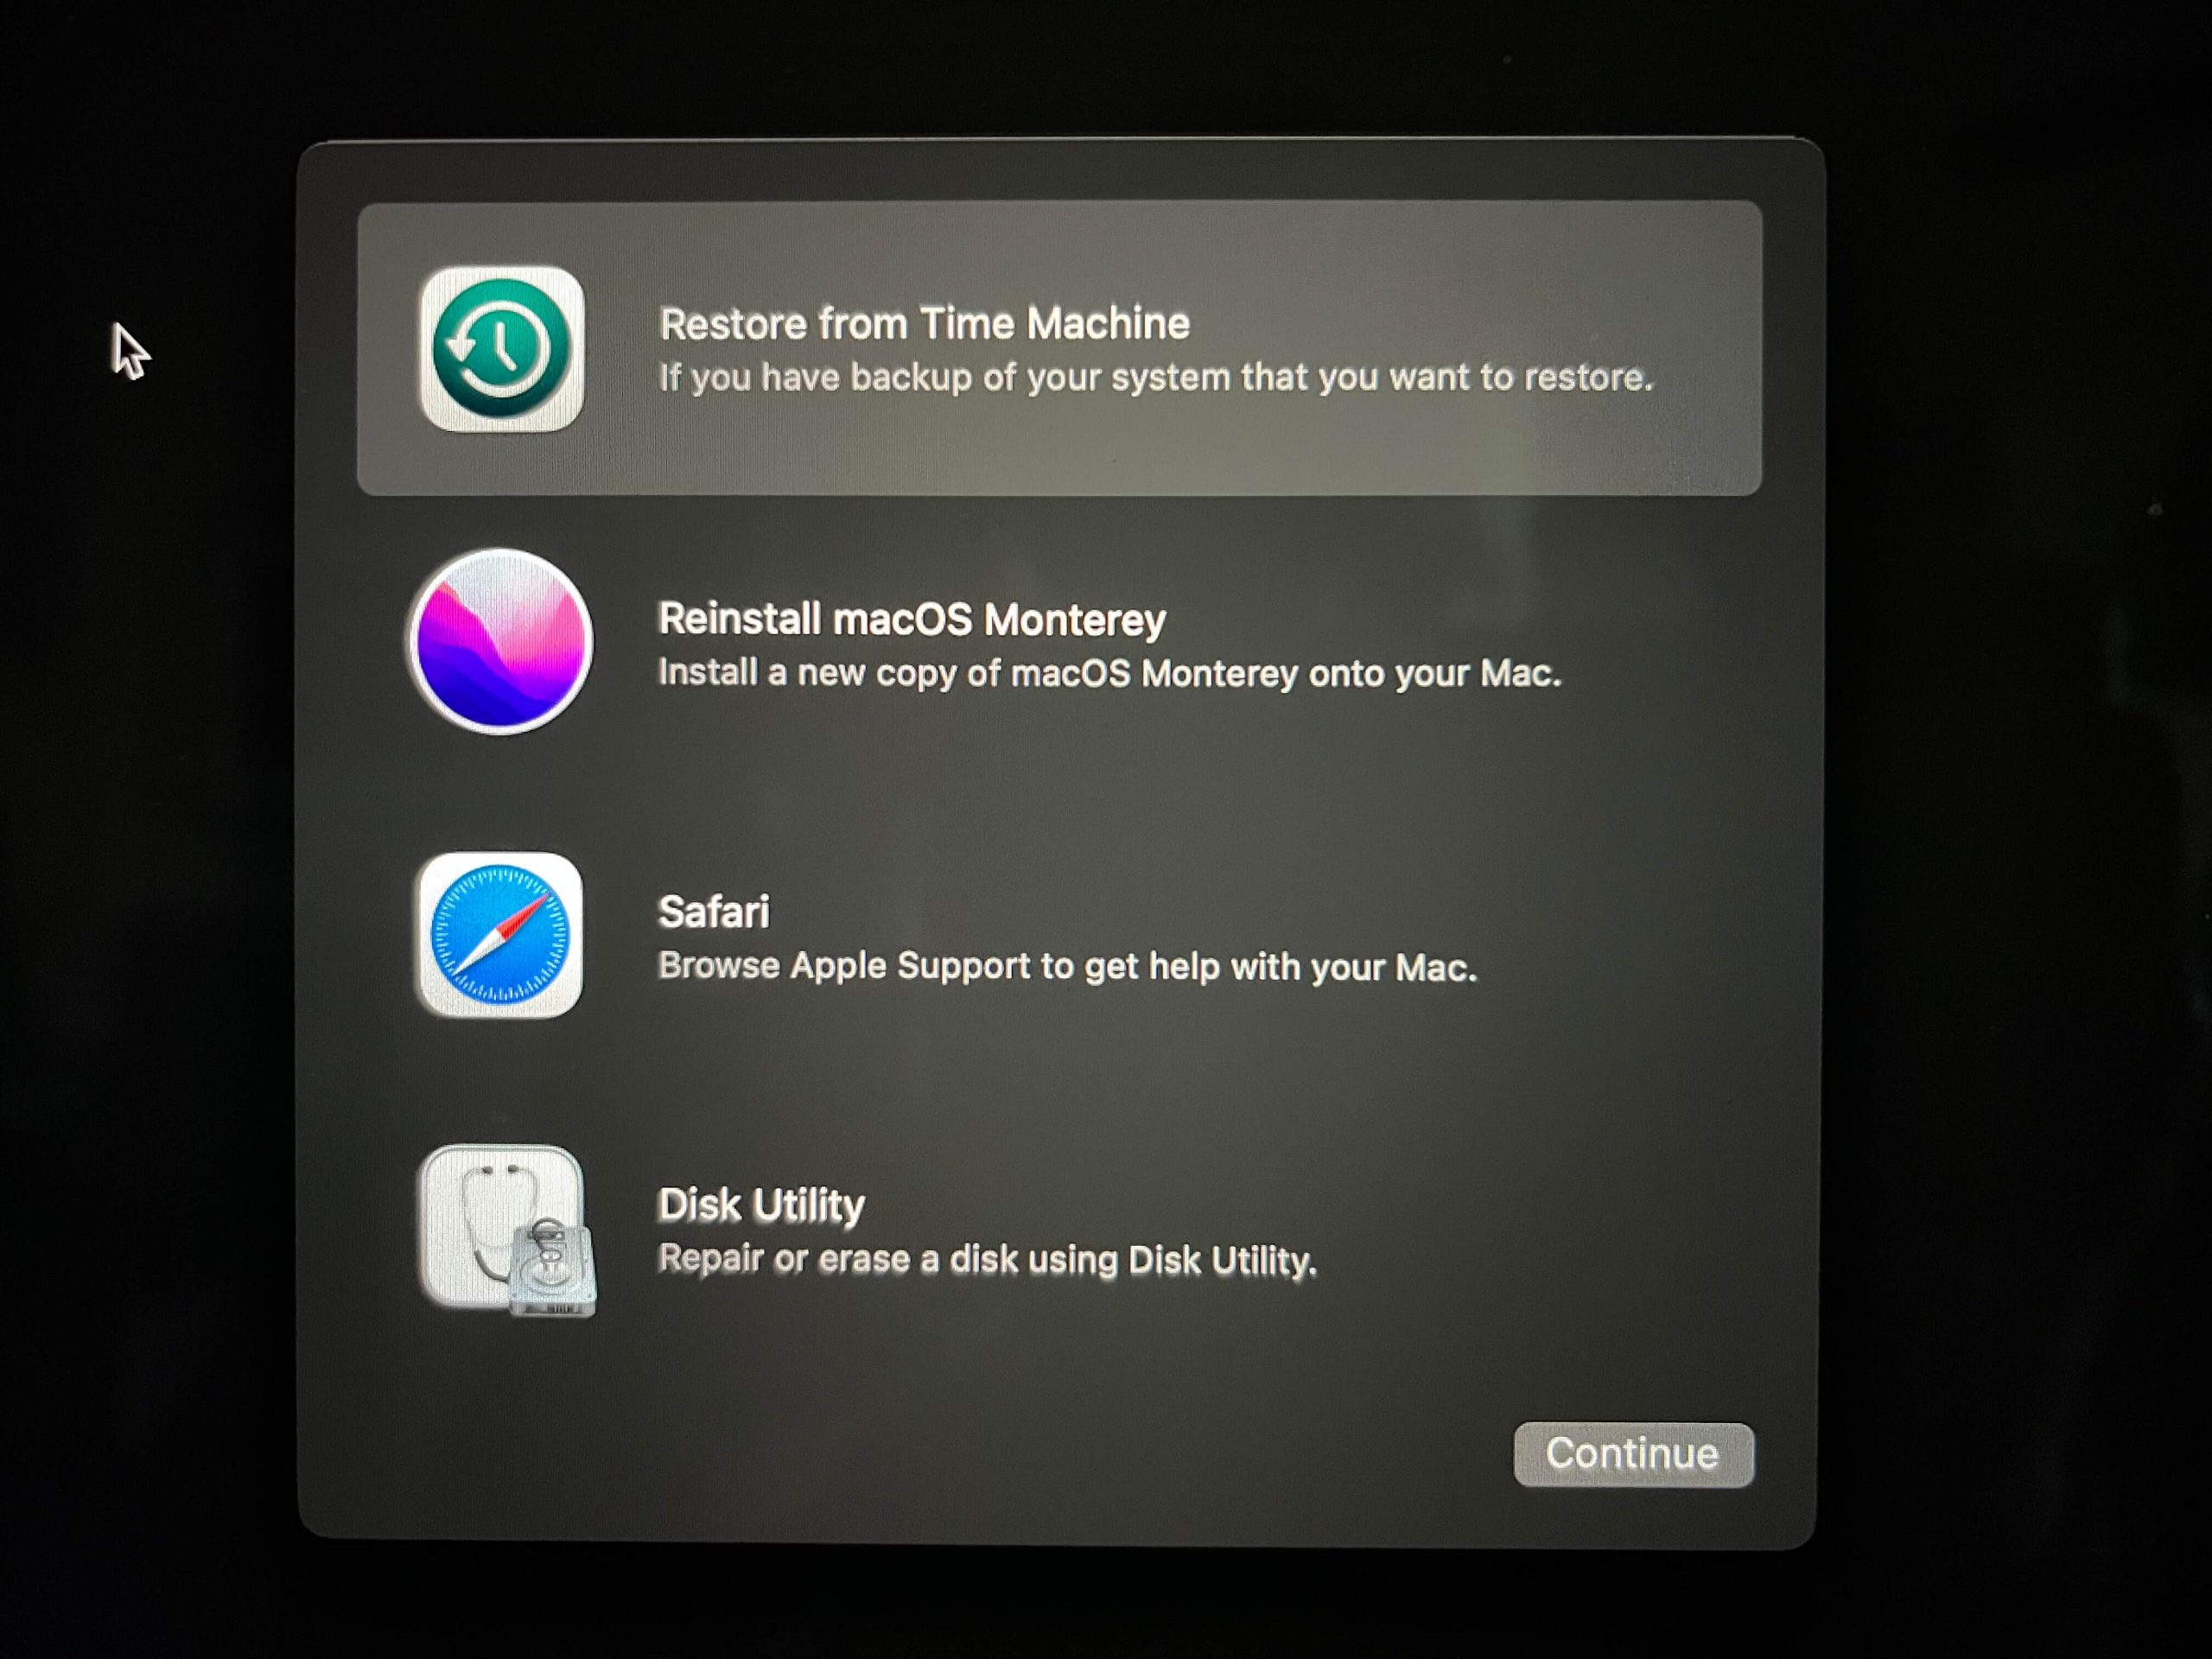 Step 2 to restore from Time Machine on Mac: Choose restore from Time Machine